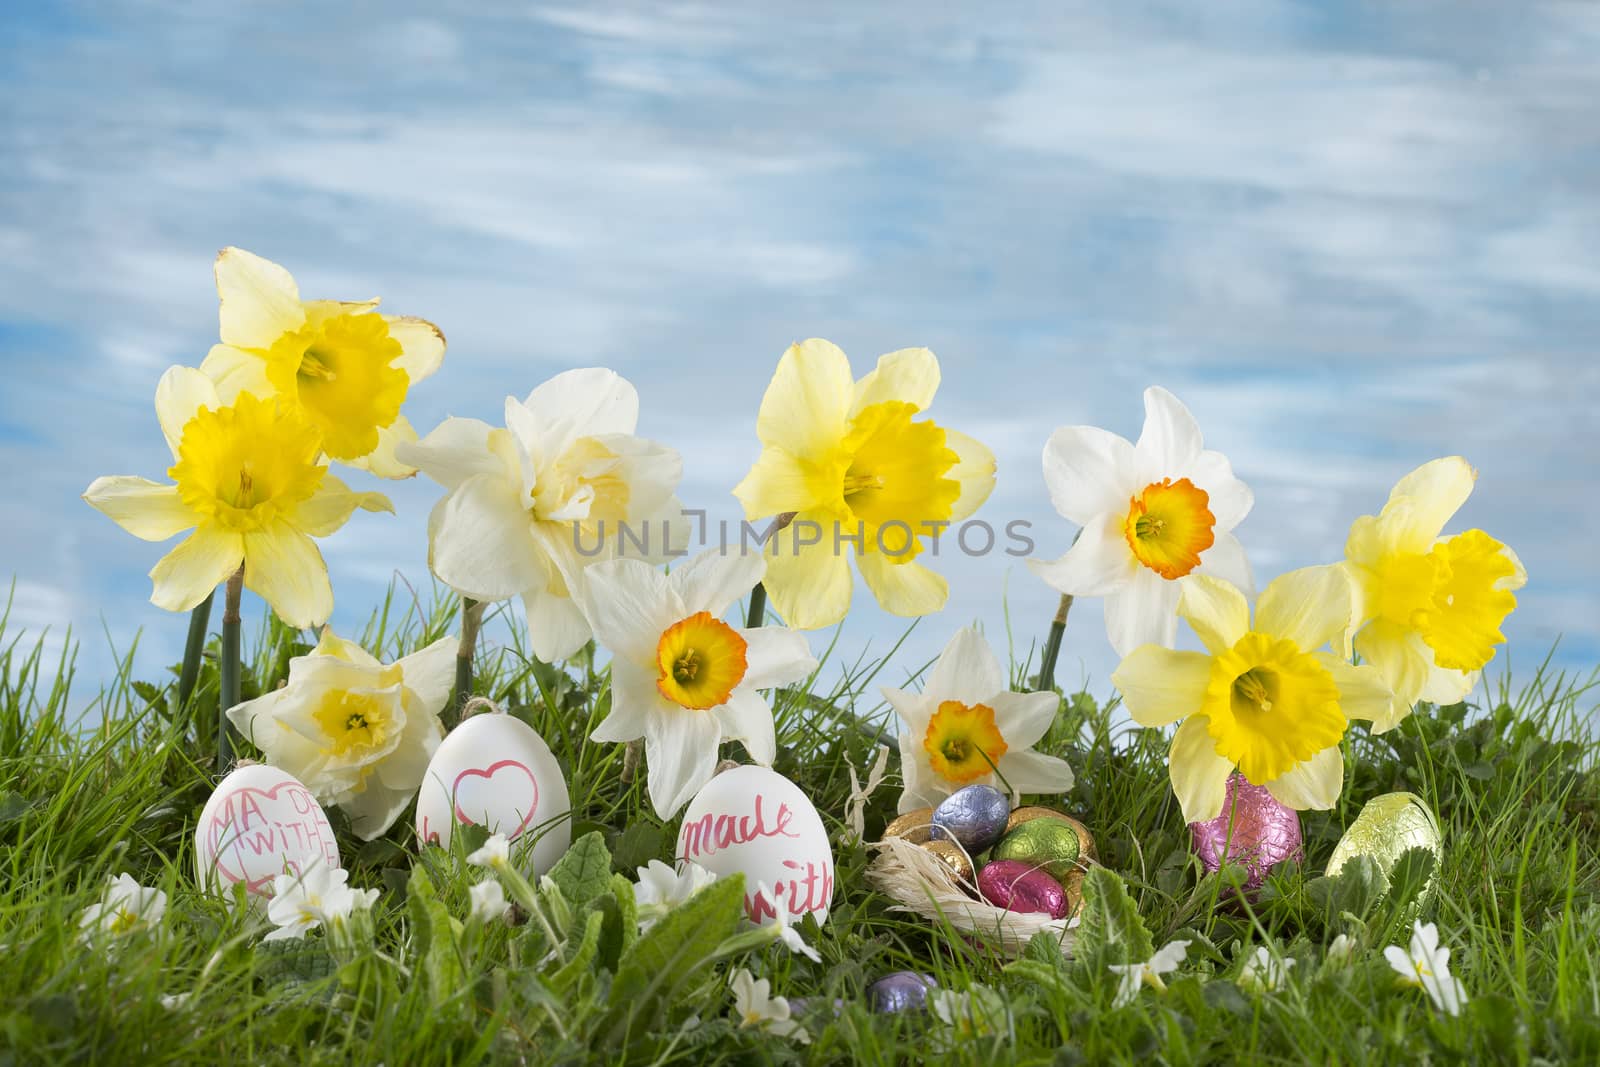 Easter eggs hiding in the grass with daffodil